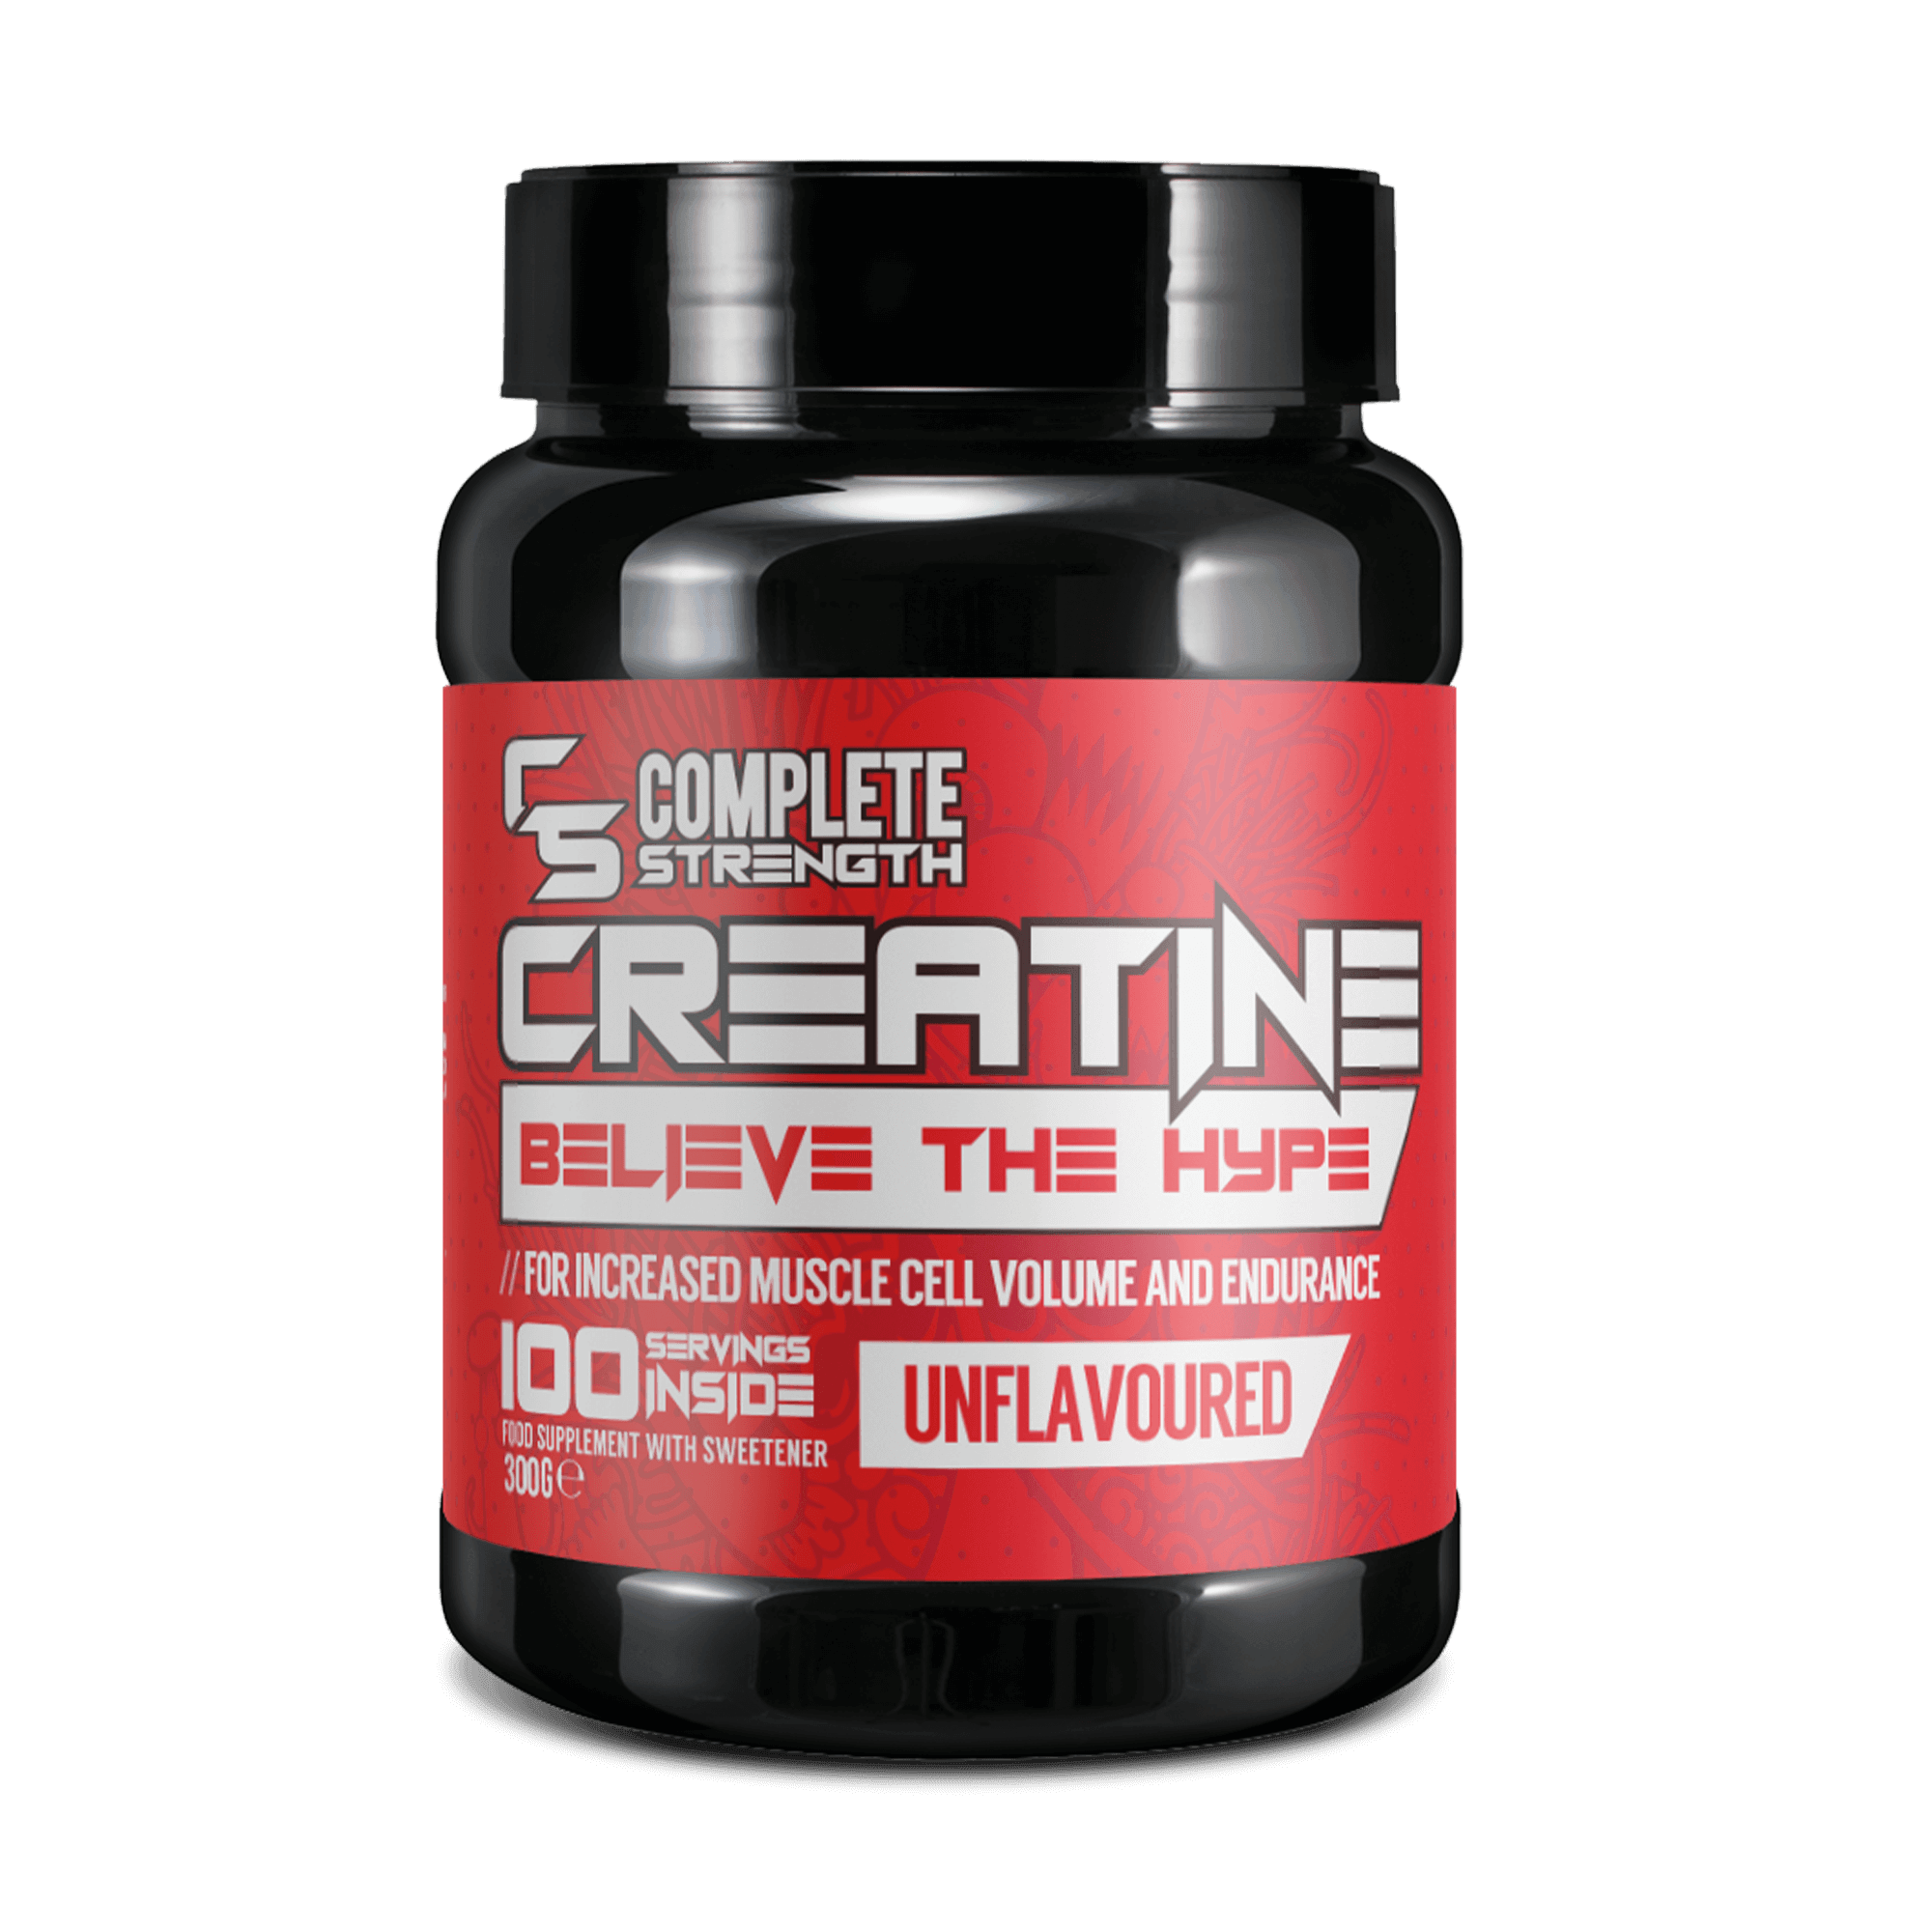 Creatine (100 Servings) - Complete Strength